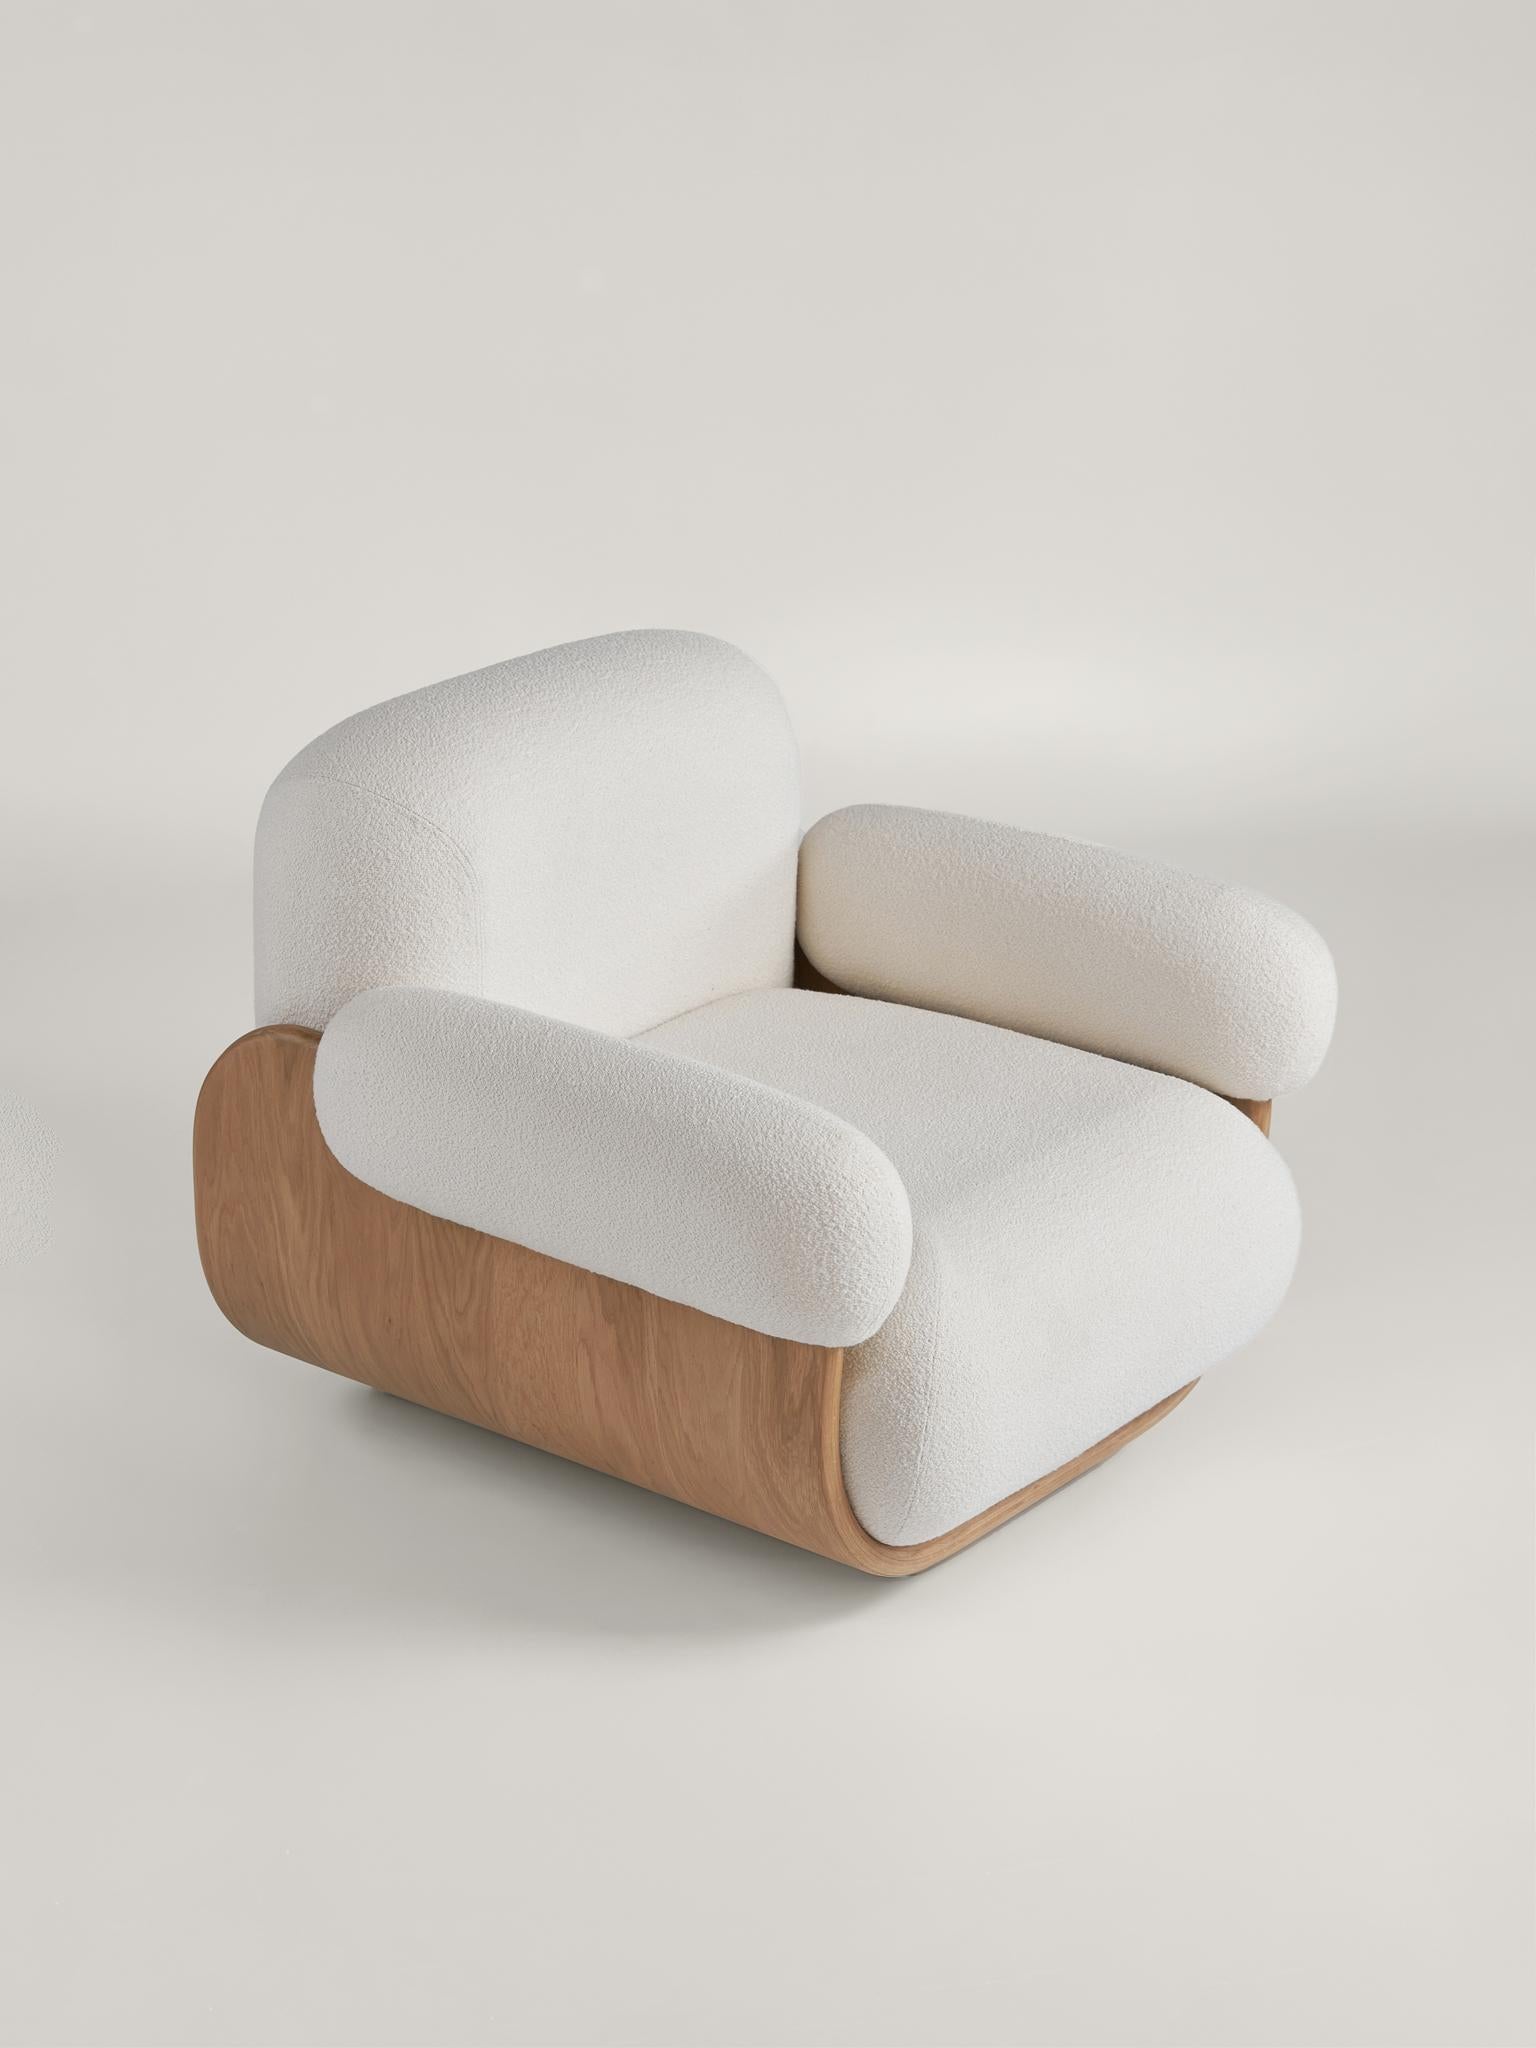 Contemporary Cannoli Armchair by Arbore x Studio PHAT For Sale